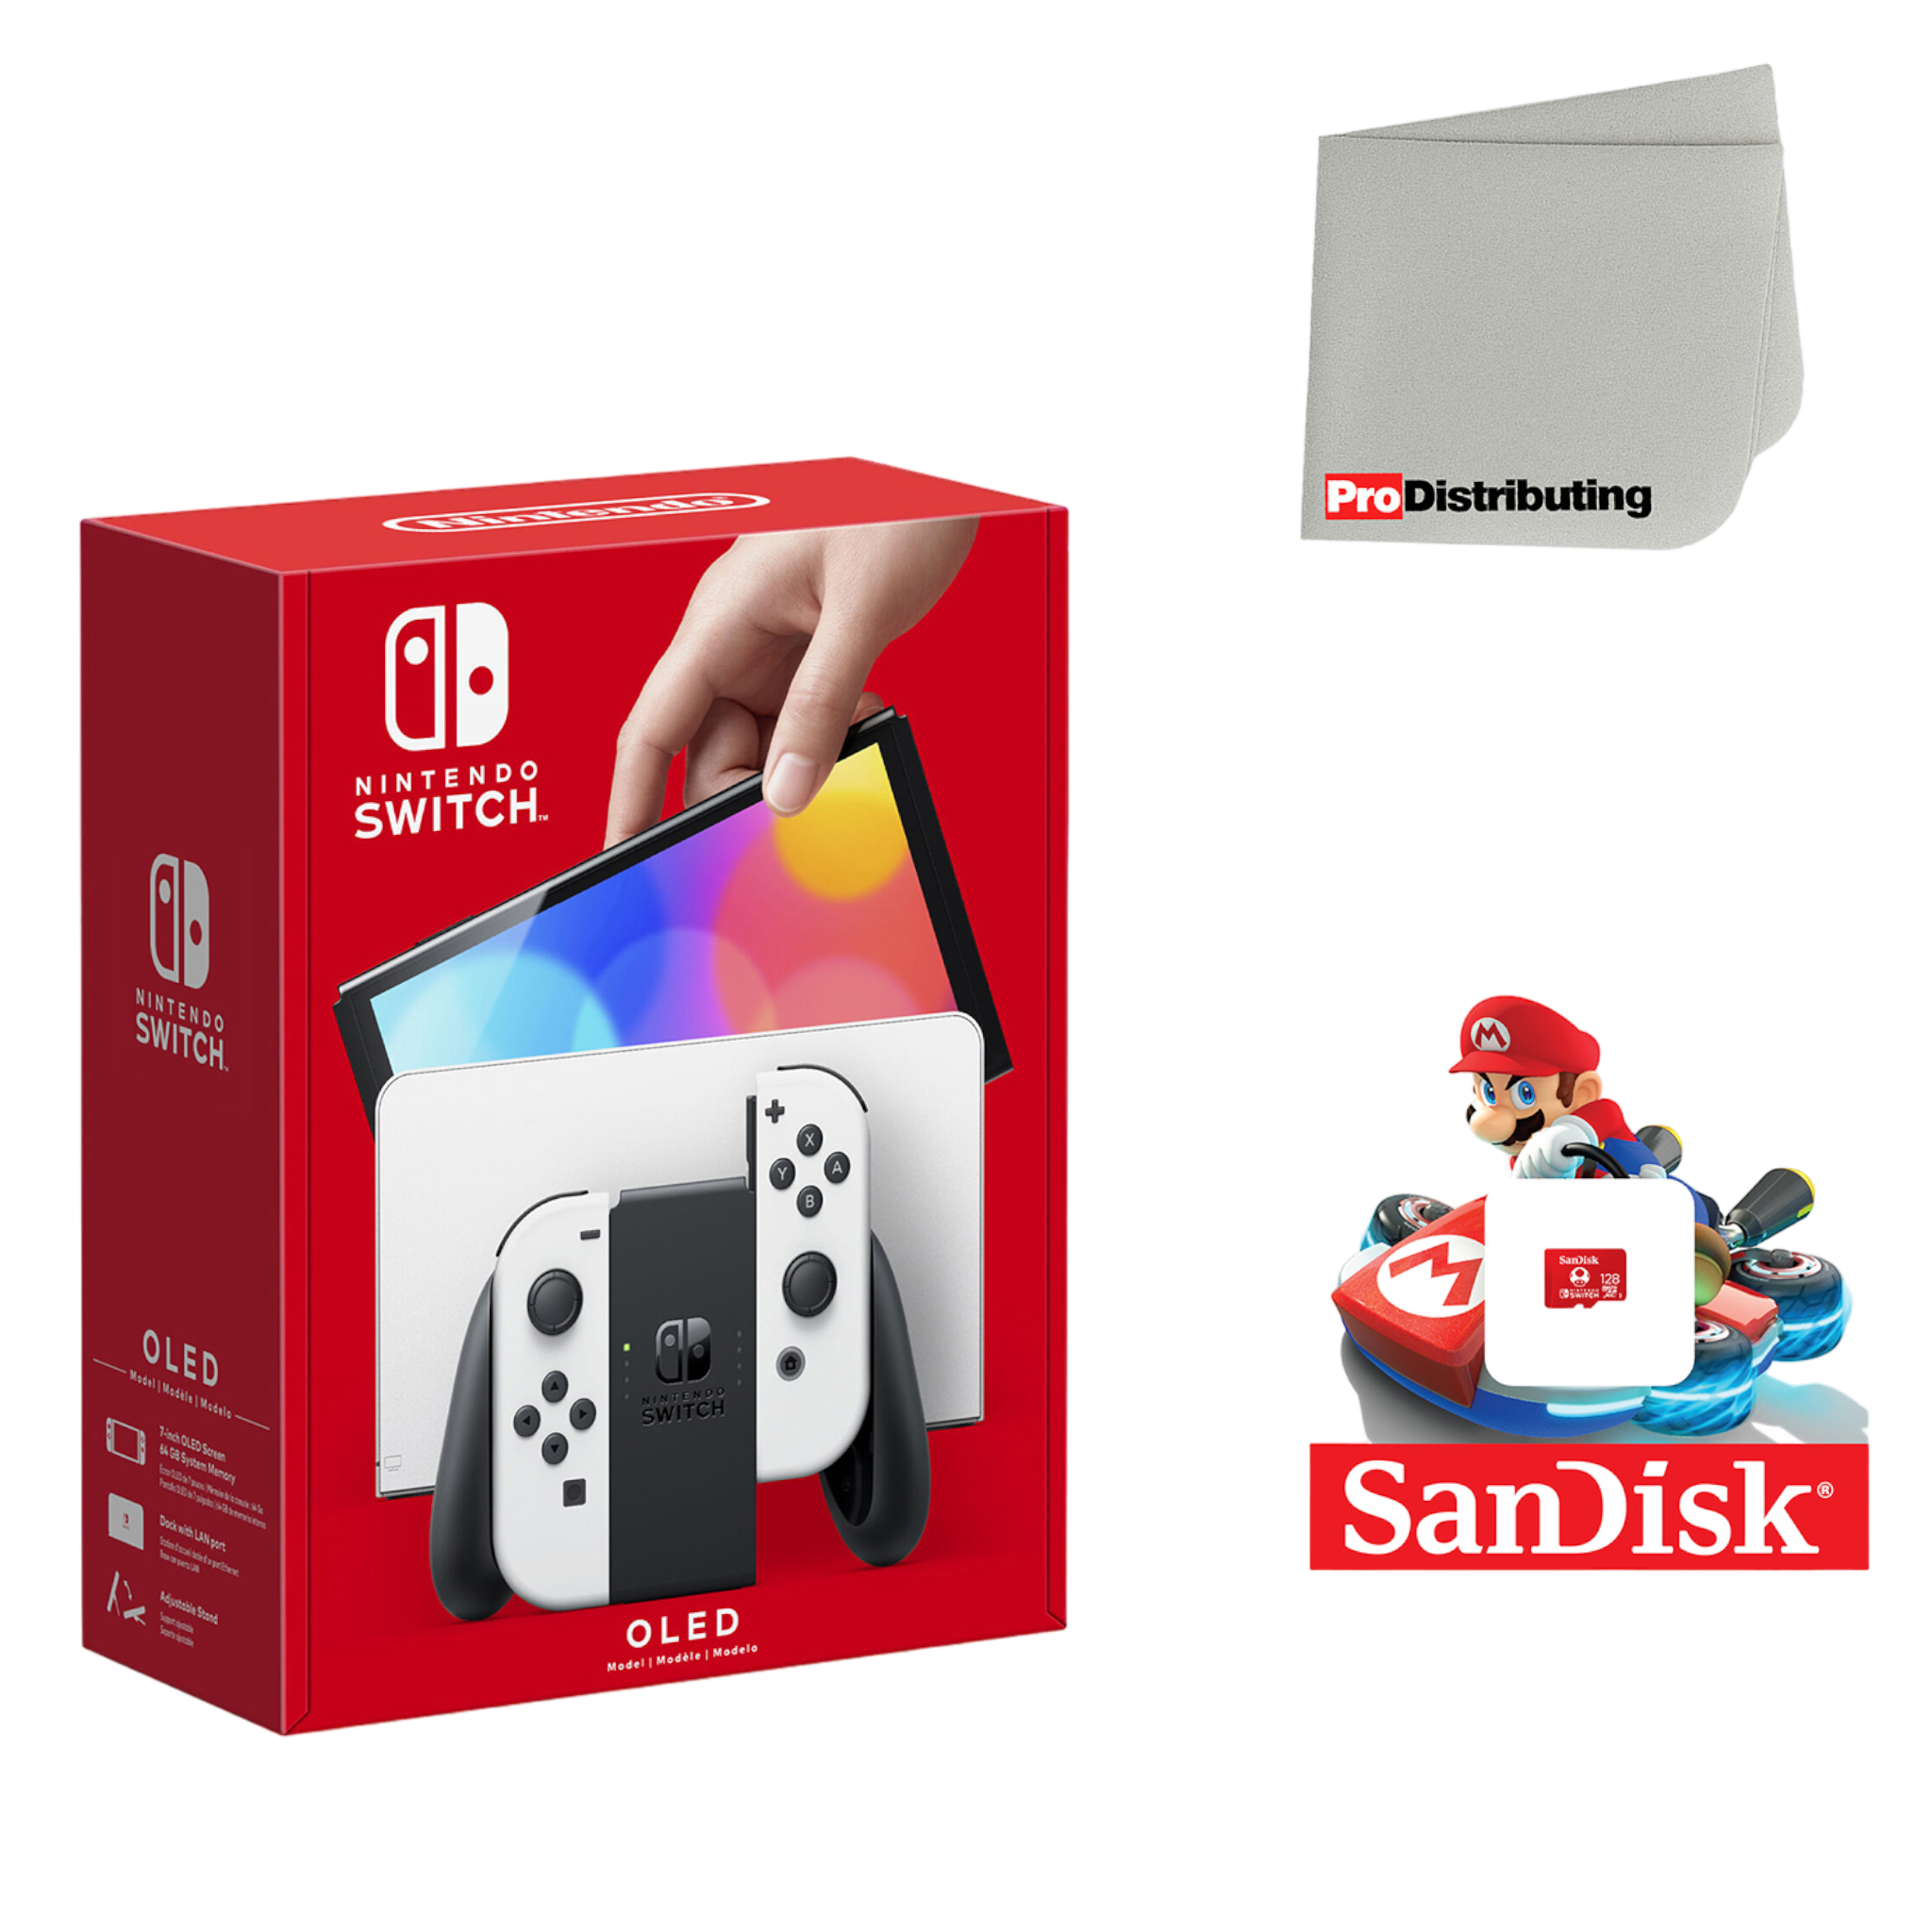 Nintendo Switch OLED Console White with Sandisk 128GB MicroSD Card and Screen Cleaning Cloth - Pro-Distributing